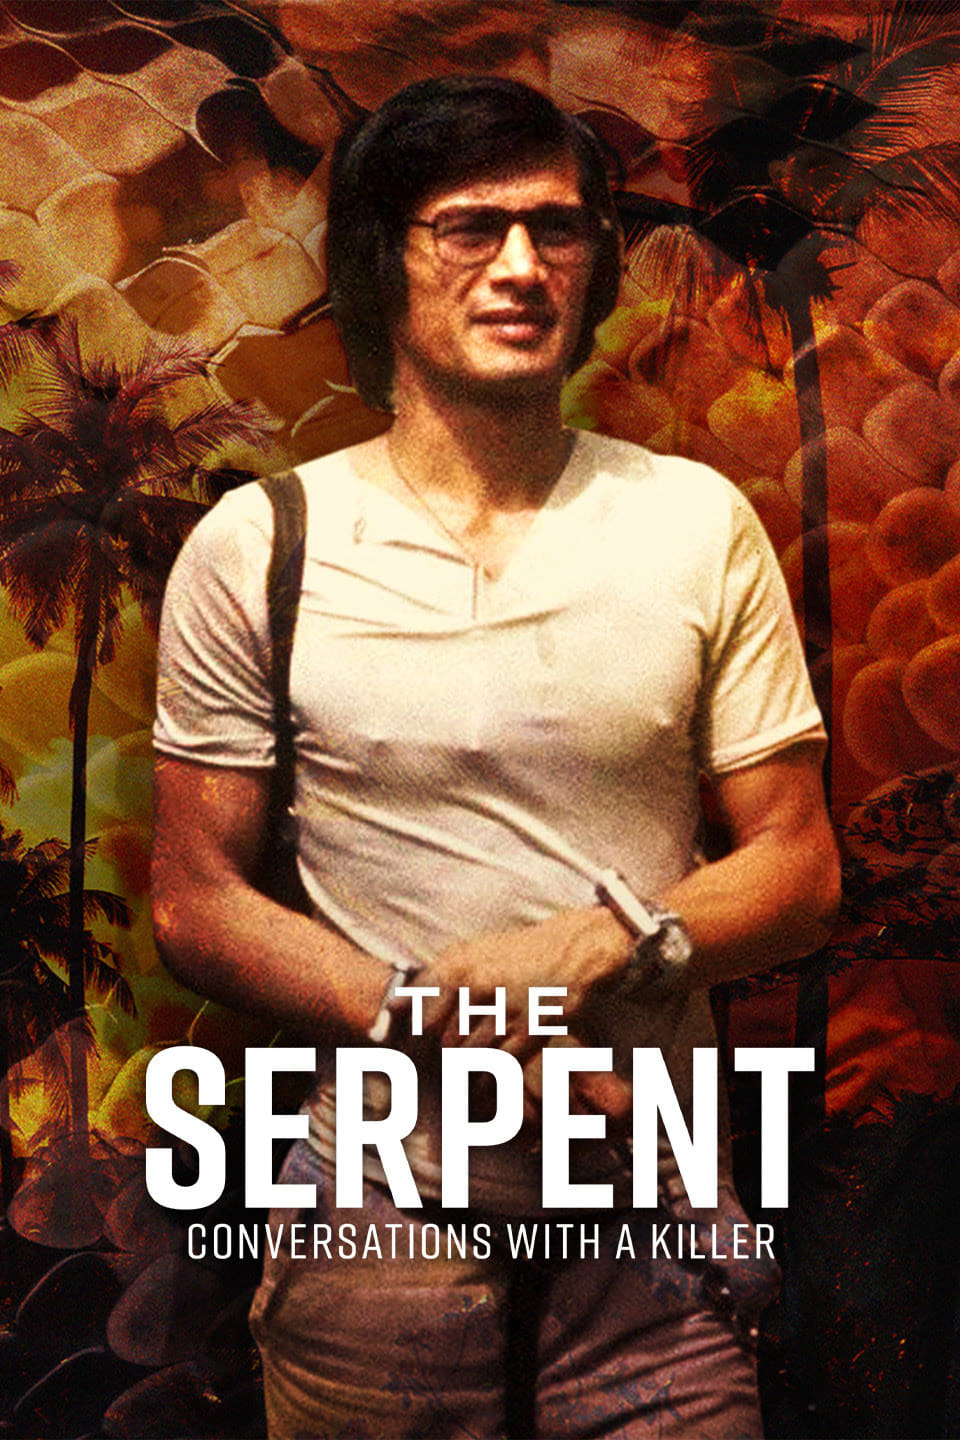 The Serpent: Conversations With a Killer